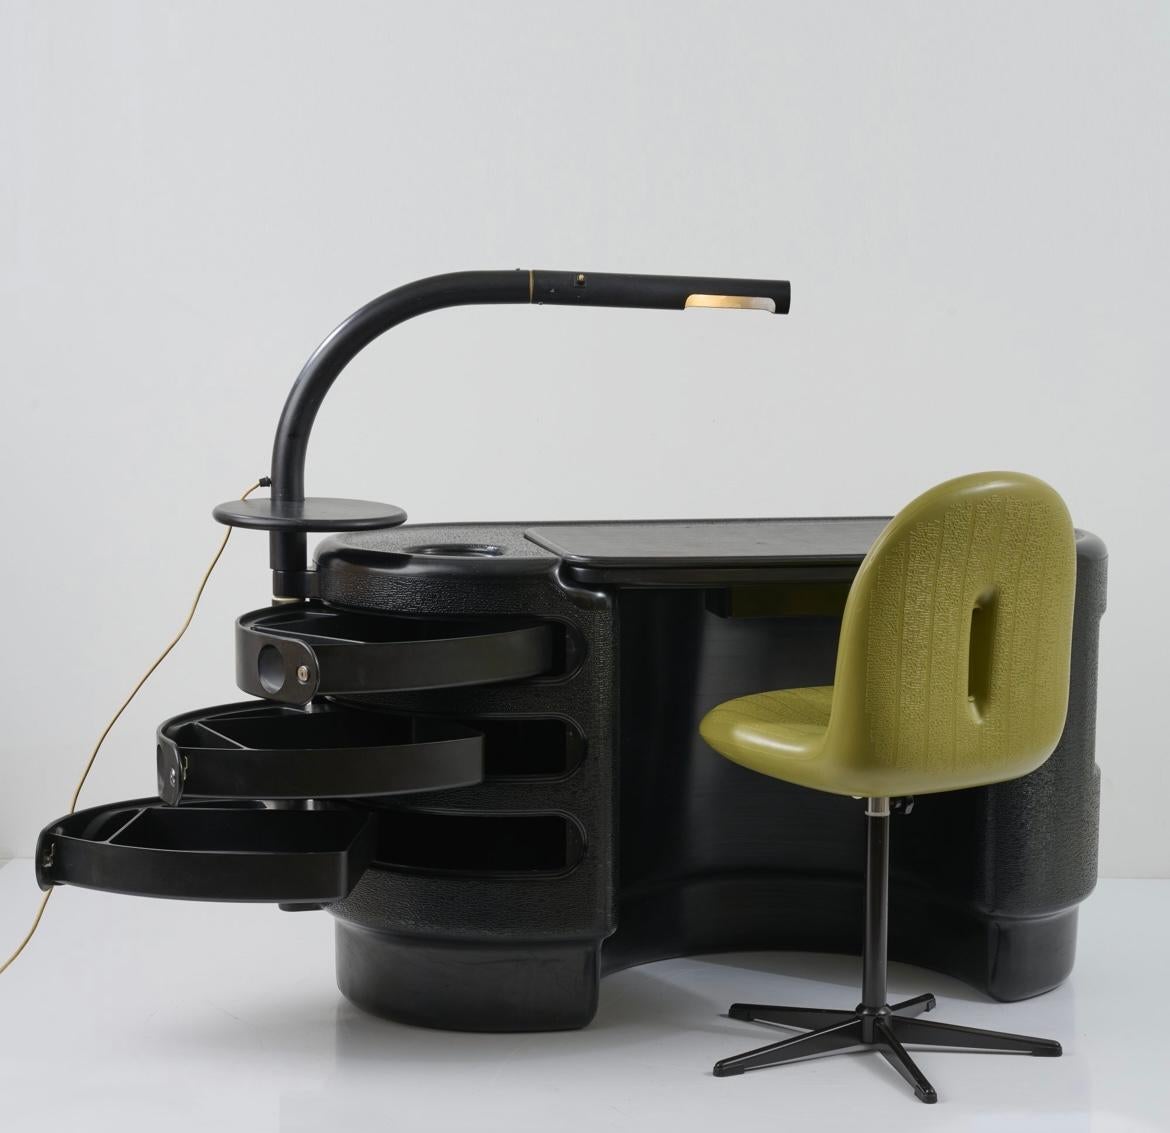 Ernest Igl for Bayer AG, 'Hadi' desk, set including adjustable chair and lamp, polyurethane, Germany, 1970s 

This design by Ernest Igl truly resembles the ethos of the seventies, featuring the commonly used material of that time: polyurethane.